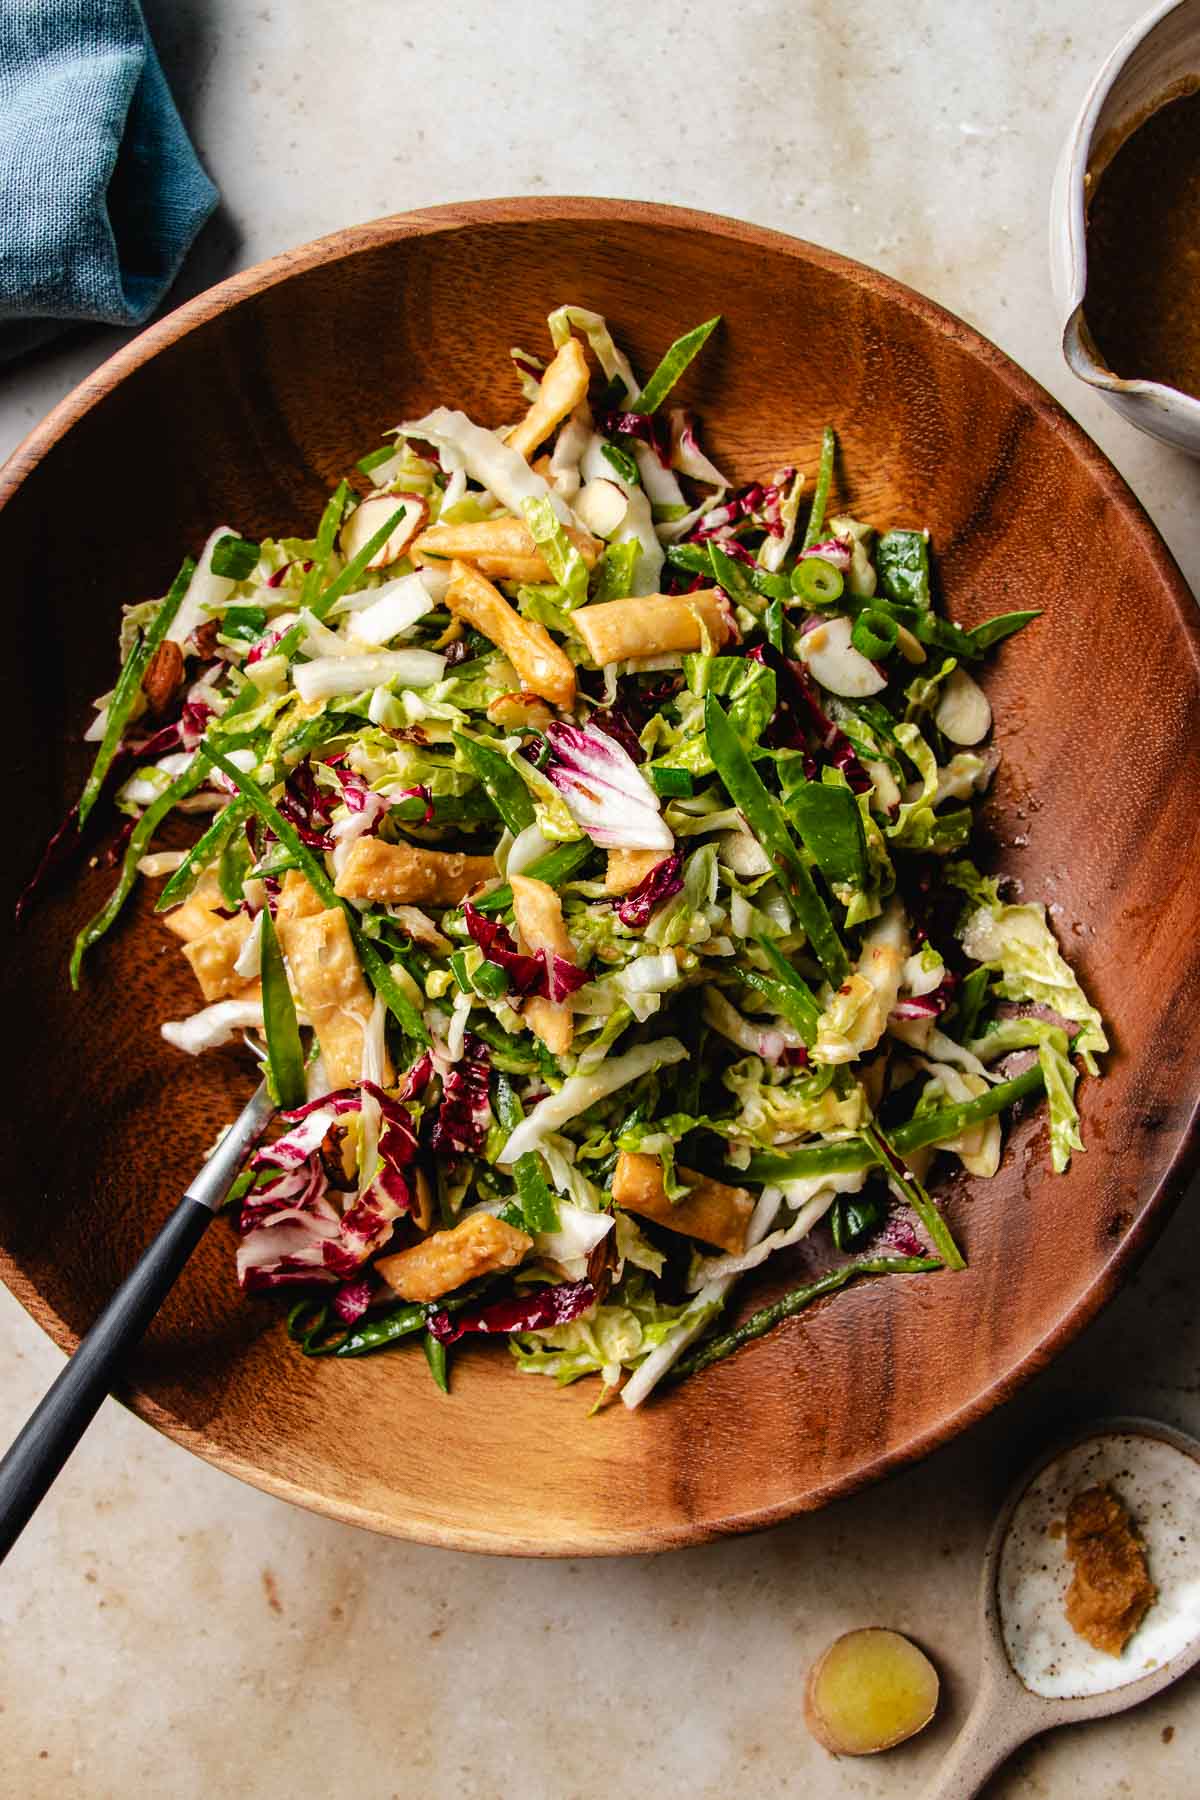 Feature image shows napa cabbage slaw served in a wood plate and tossed with dressing.